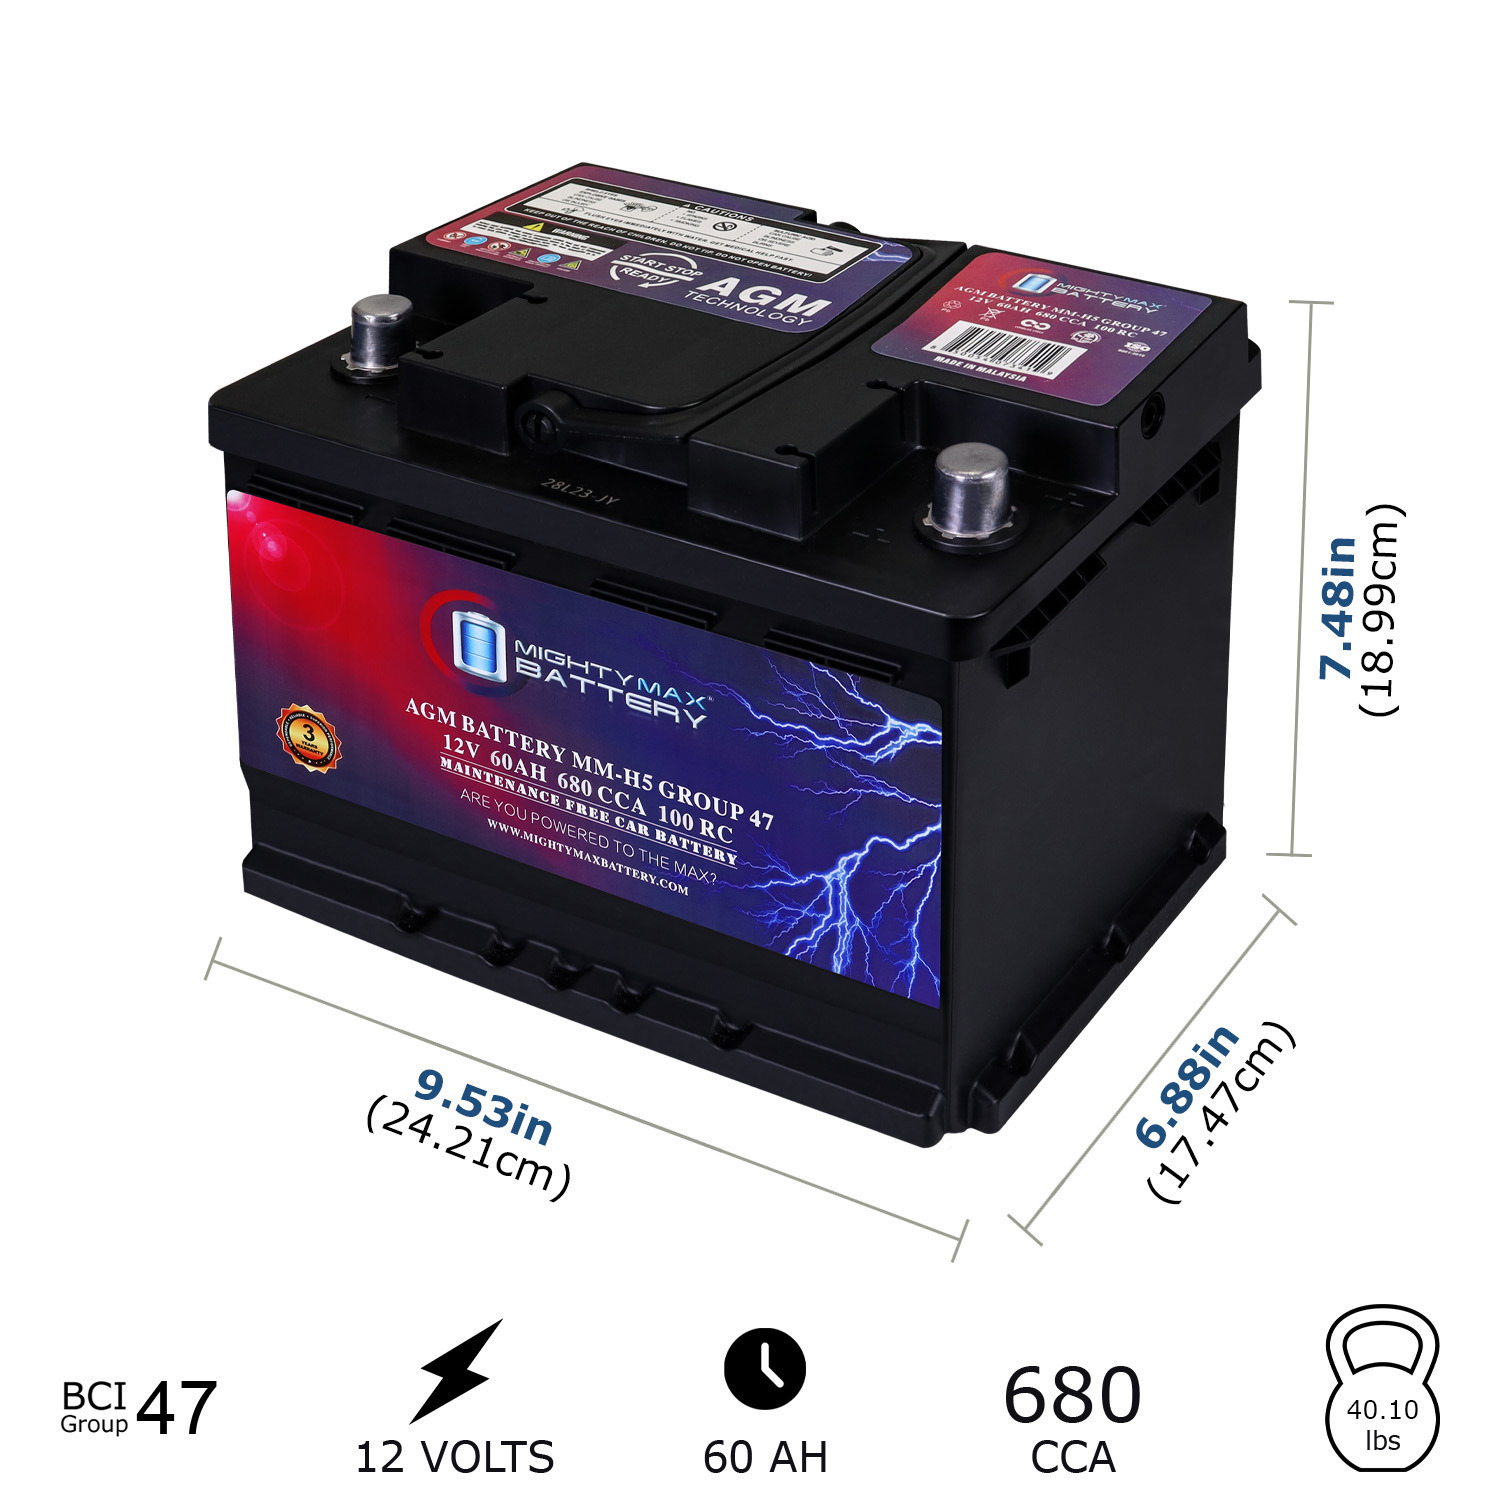 MM-H5 Group 47 12V 60AH 100RC 680CCA Replacement Battery Compatible with ACDelco 47 AGM